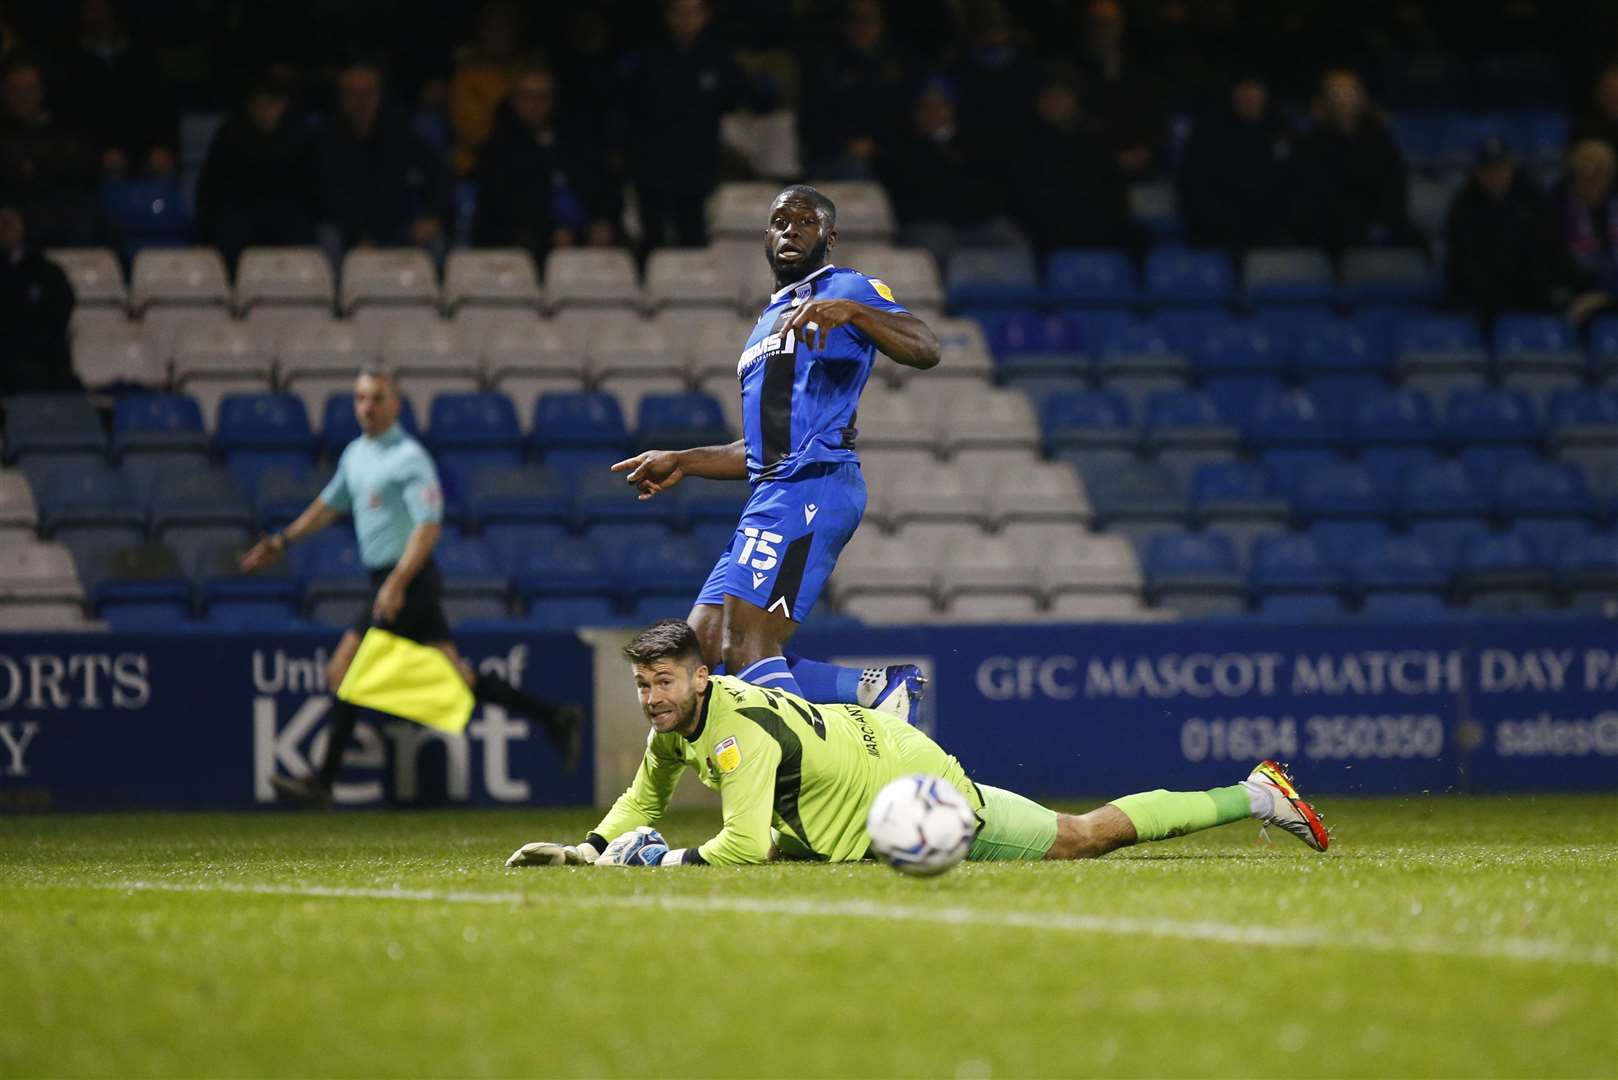 Gillingham striker Akinde goes even closer with another which comes off the woodwork Picture: Andy Jones